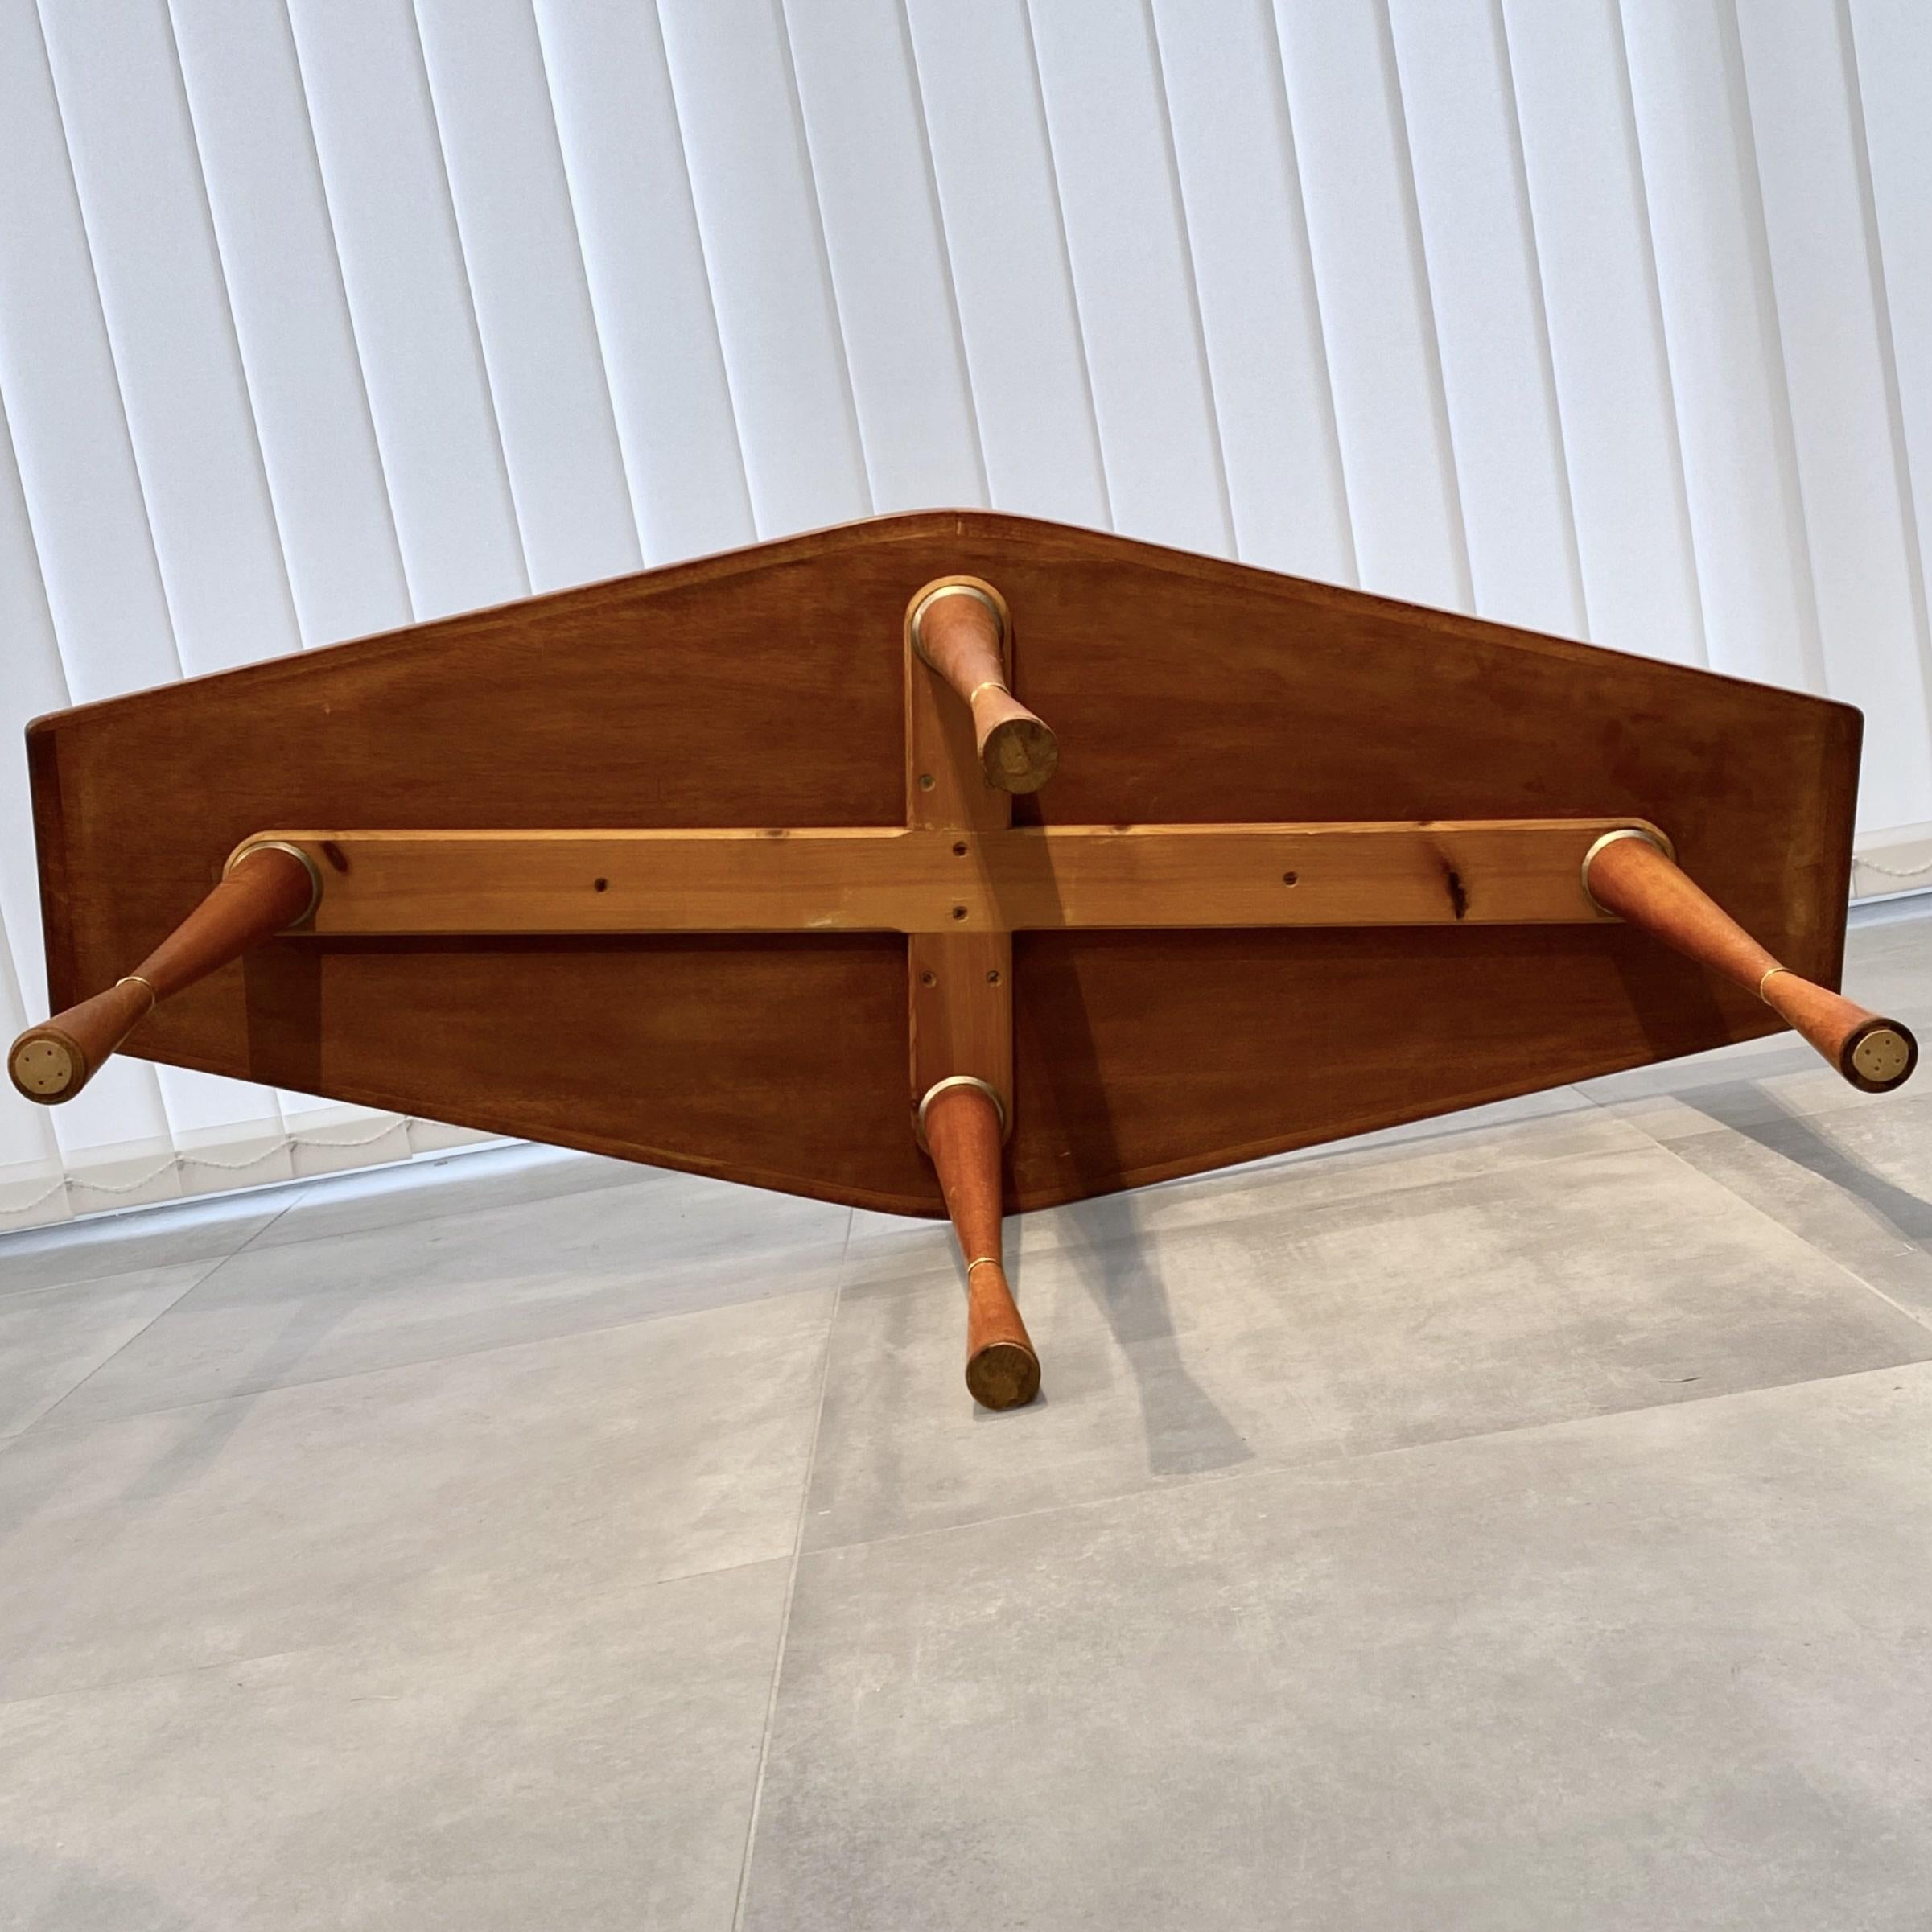 Swedish Modern coffee table with brass inlays, Sweden, 1940s For Sale 4